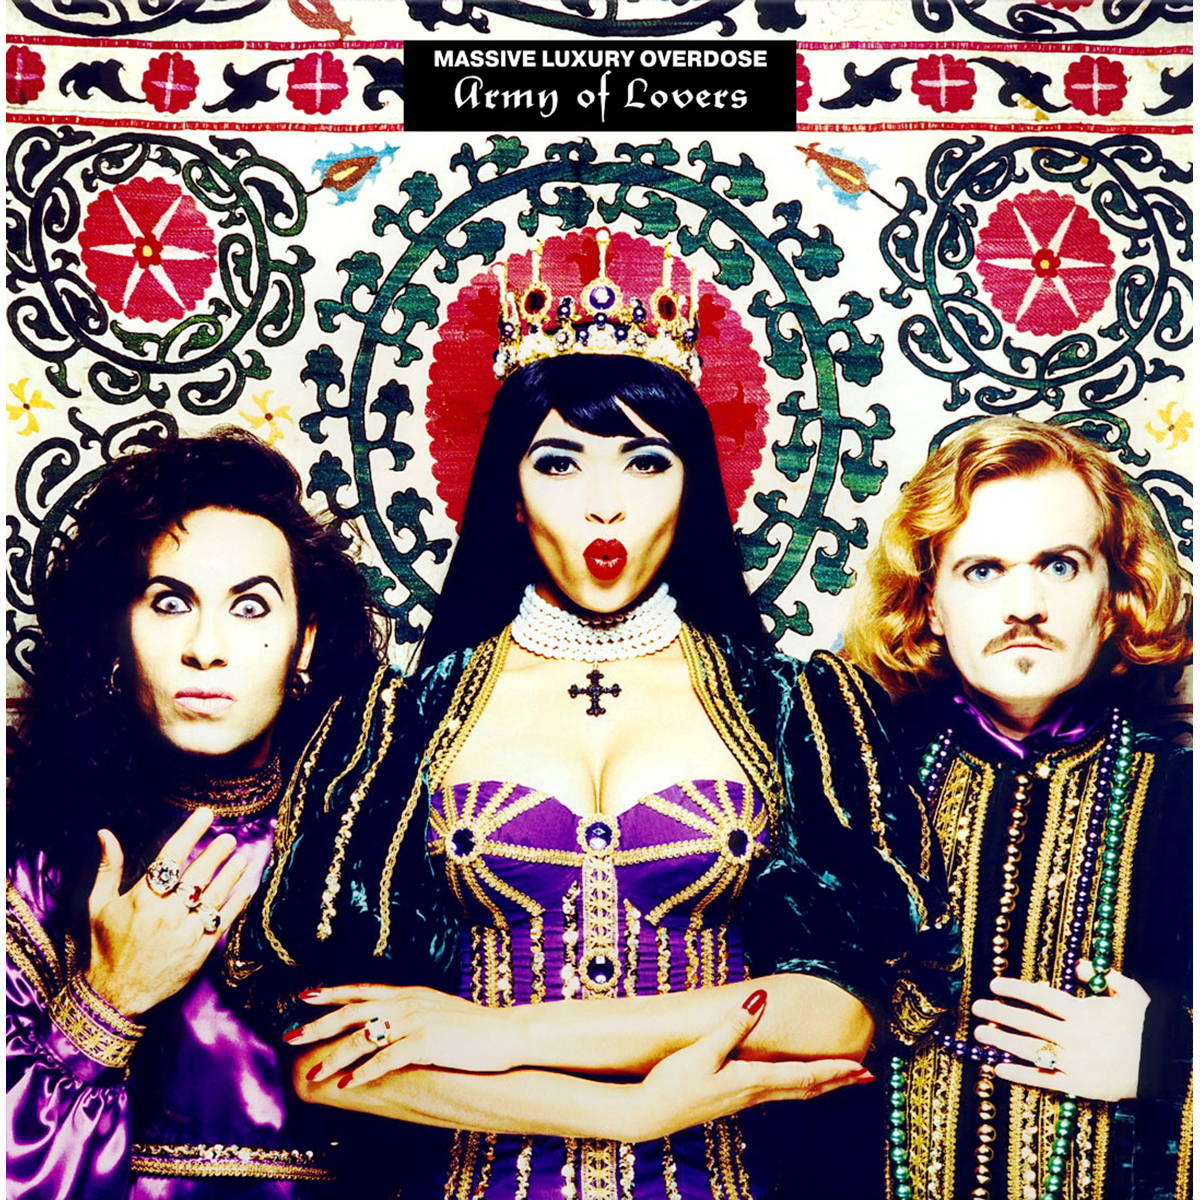 Арми групп. Army of lovers. Army of lovers massive Luxury Overdose 1991. Army of lovers 1991.